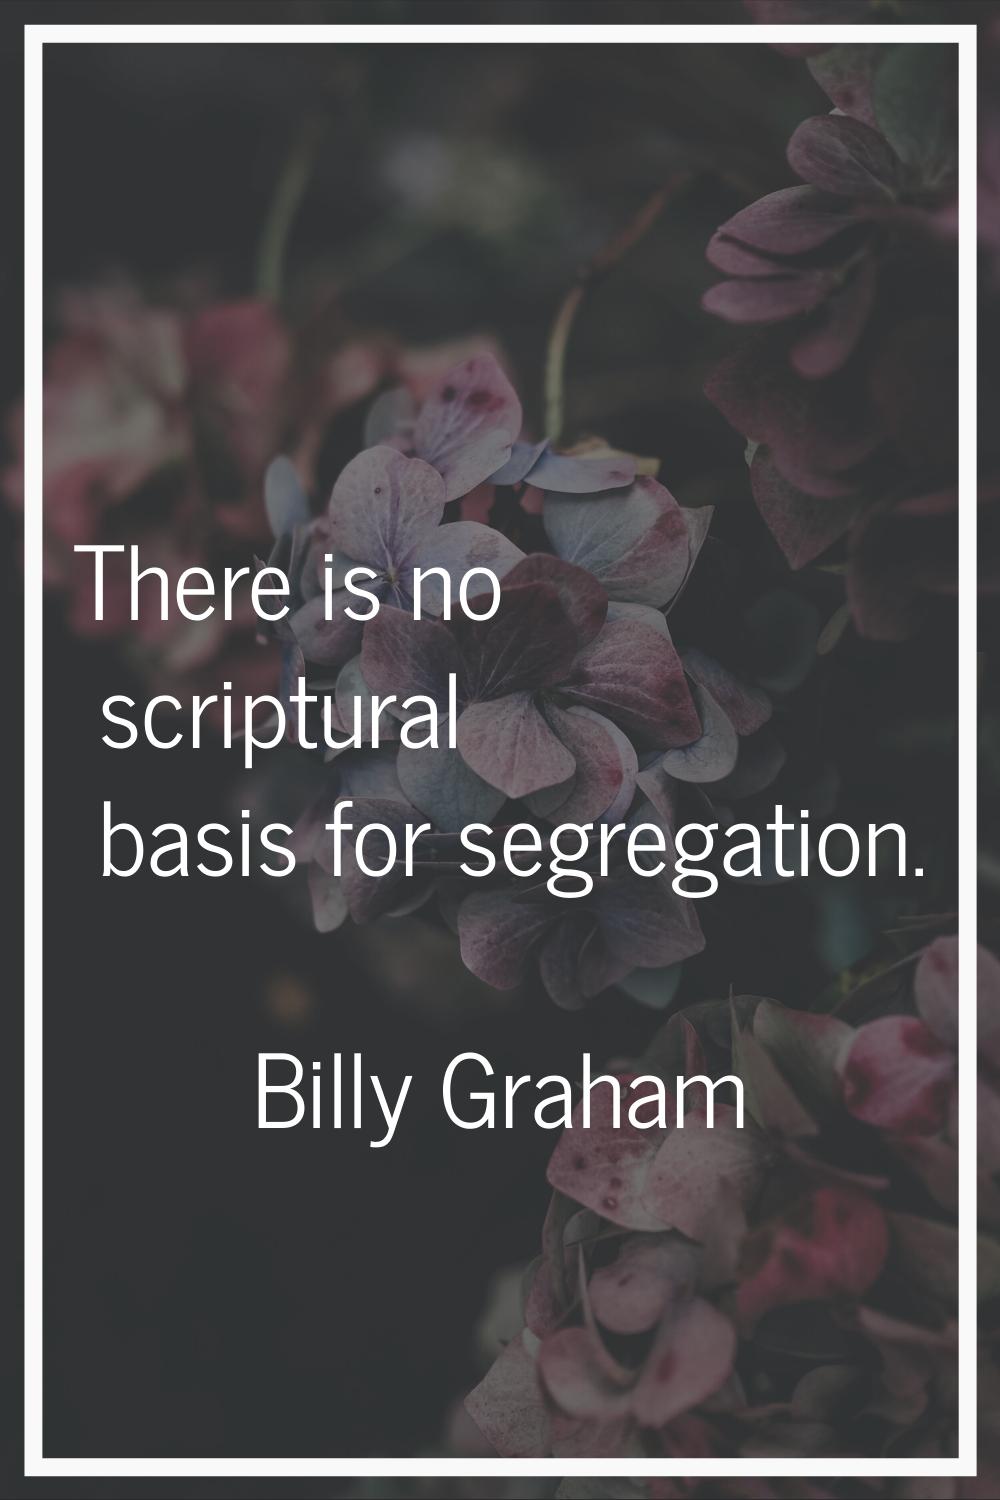 There is no scriptural basis for segregation.